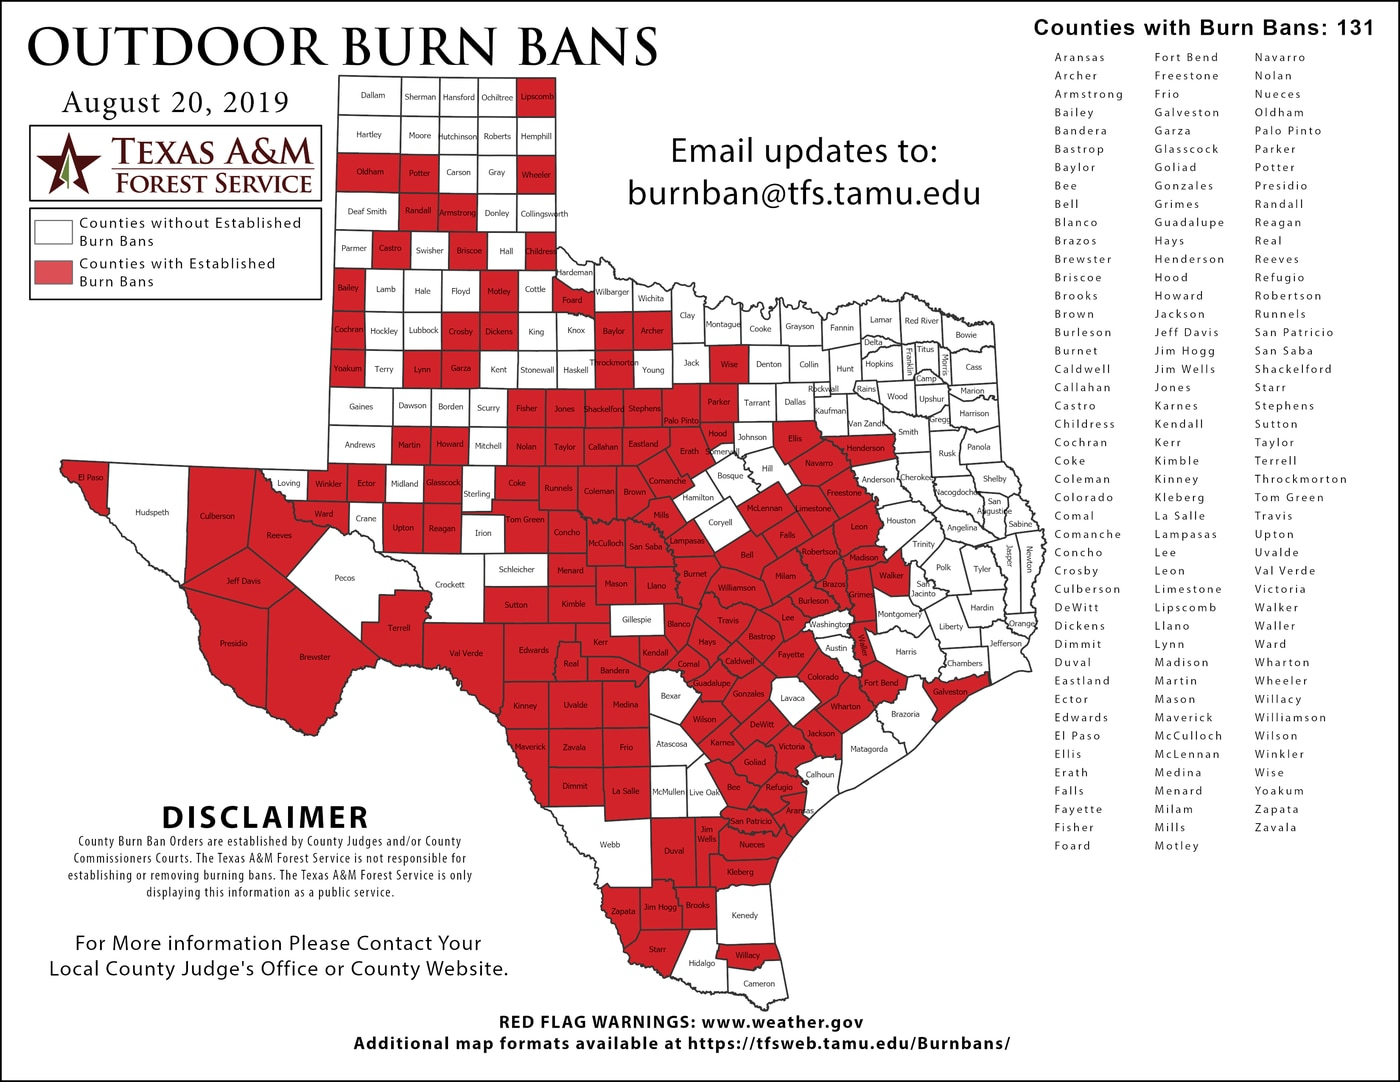 Randall County Now Under 90 day Burn Ban